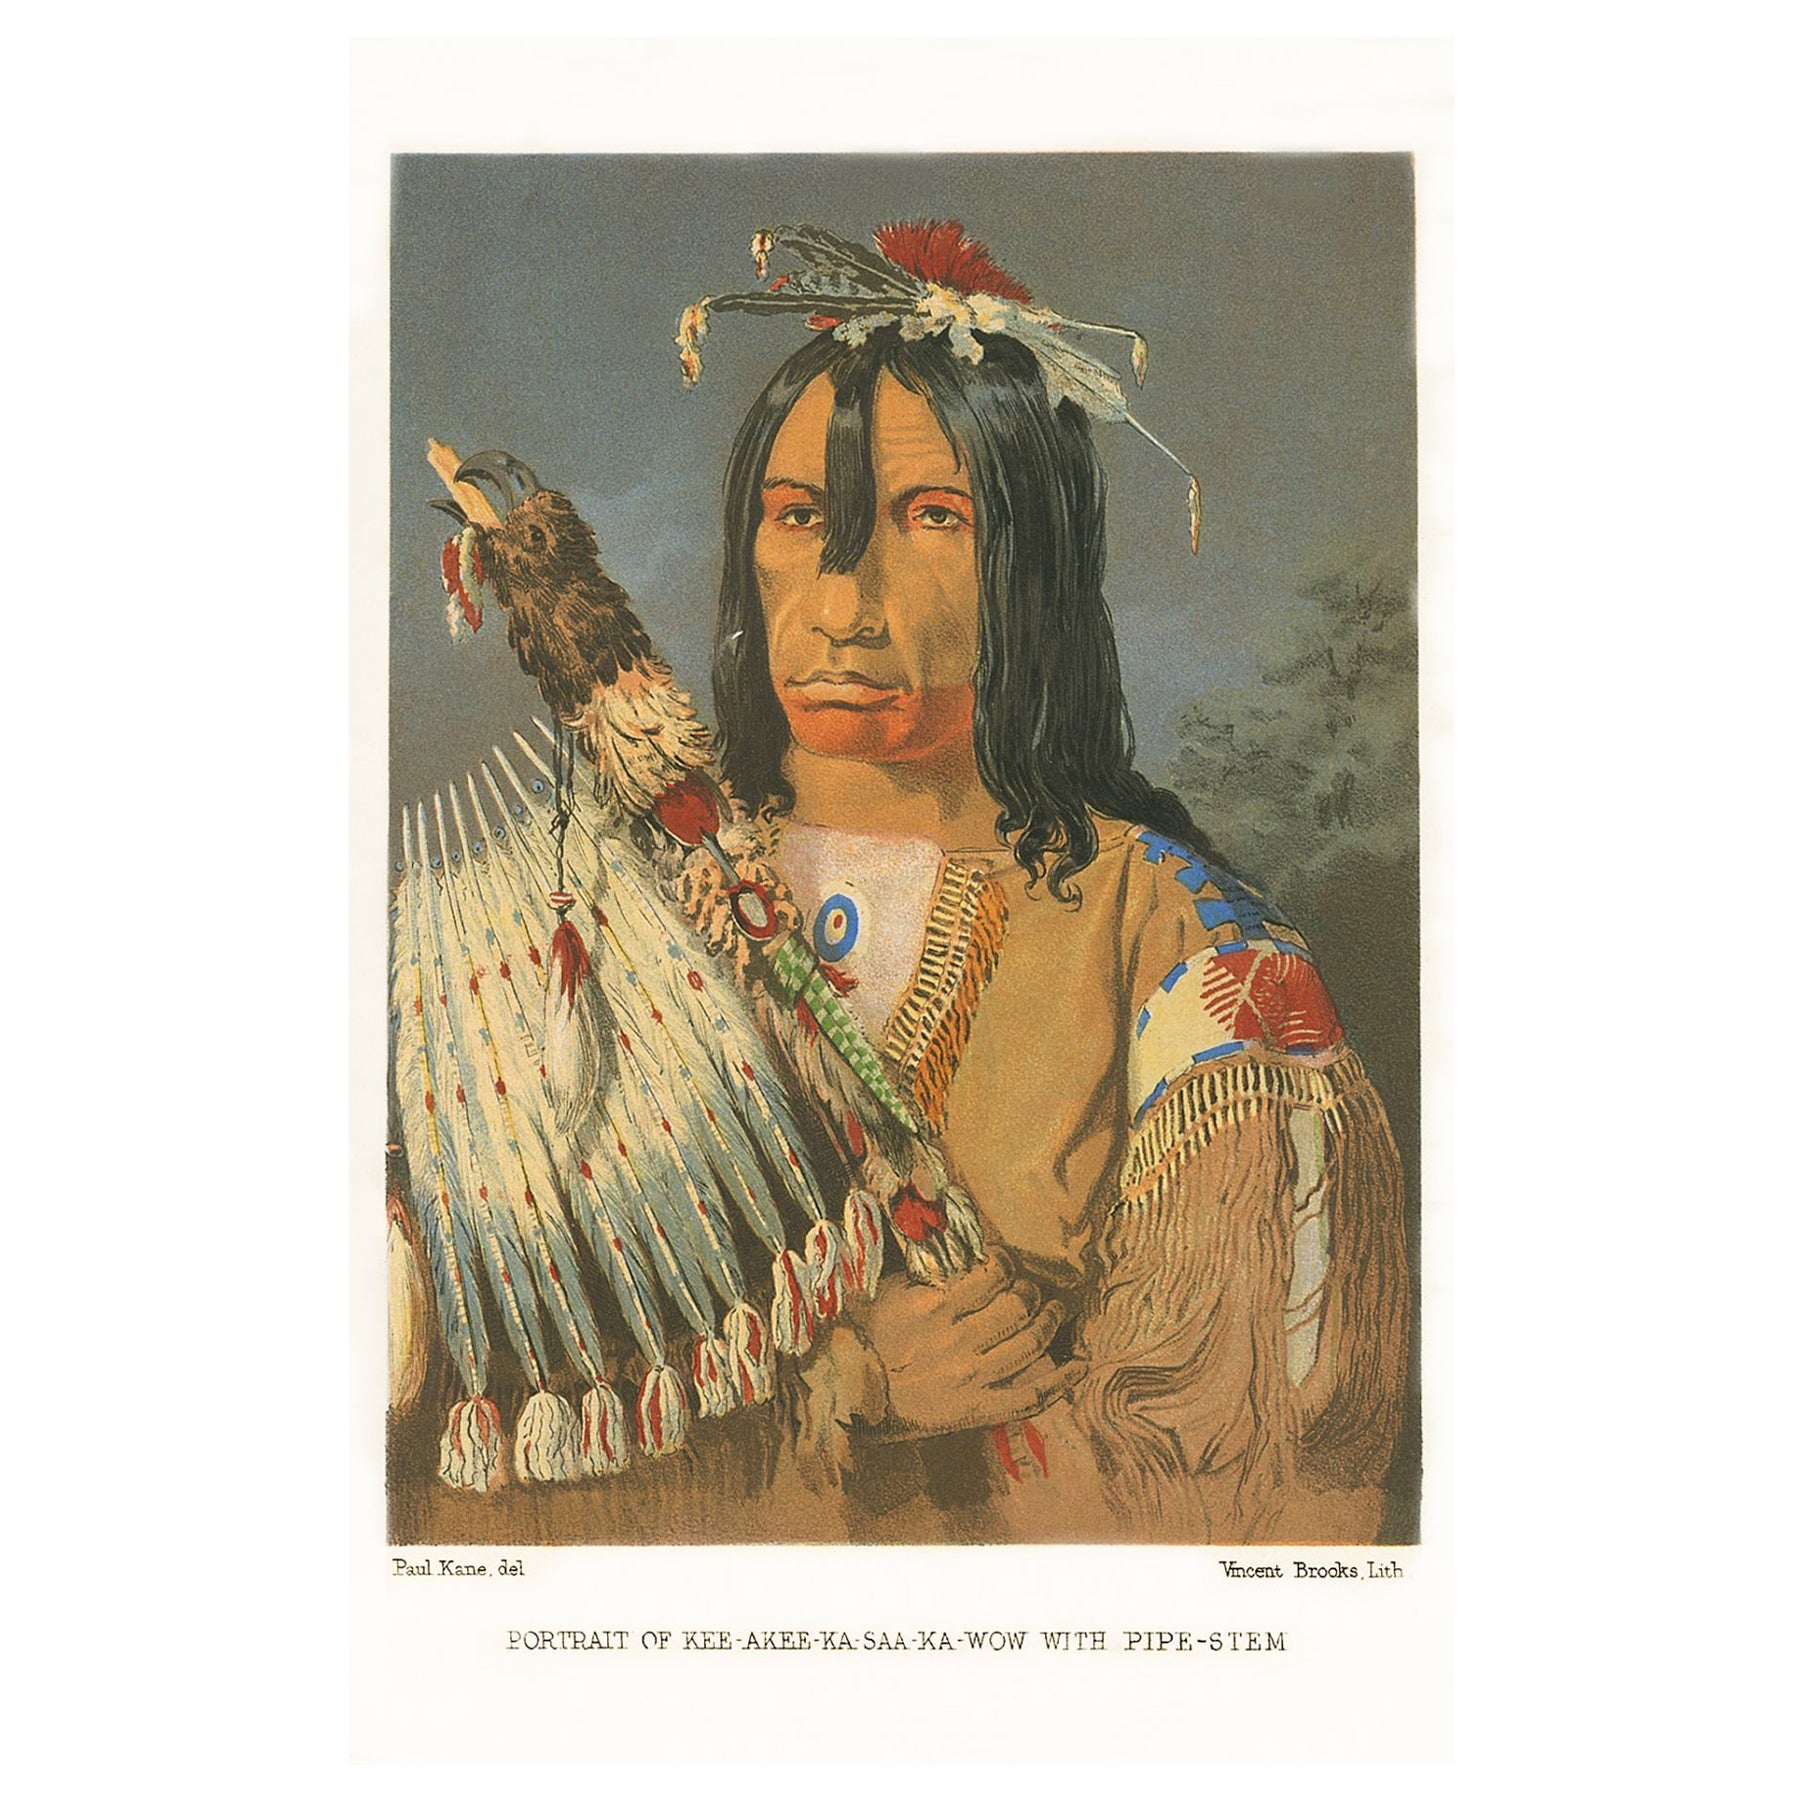 First Edition of Historical Work on ". Indians of North America" by Paul Kane